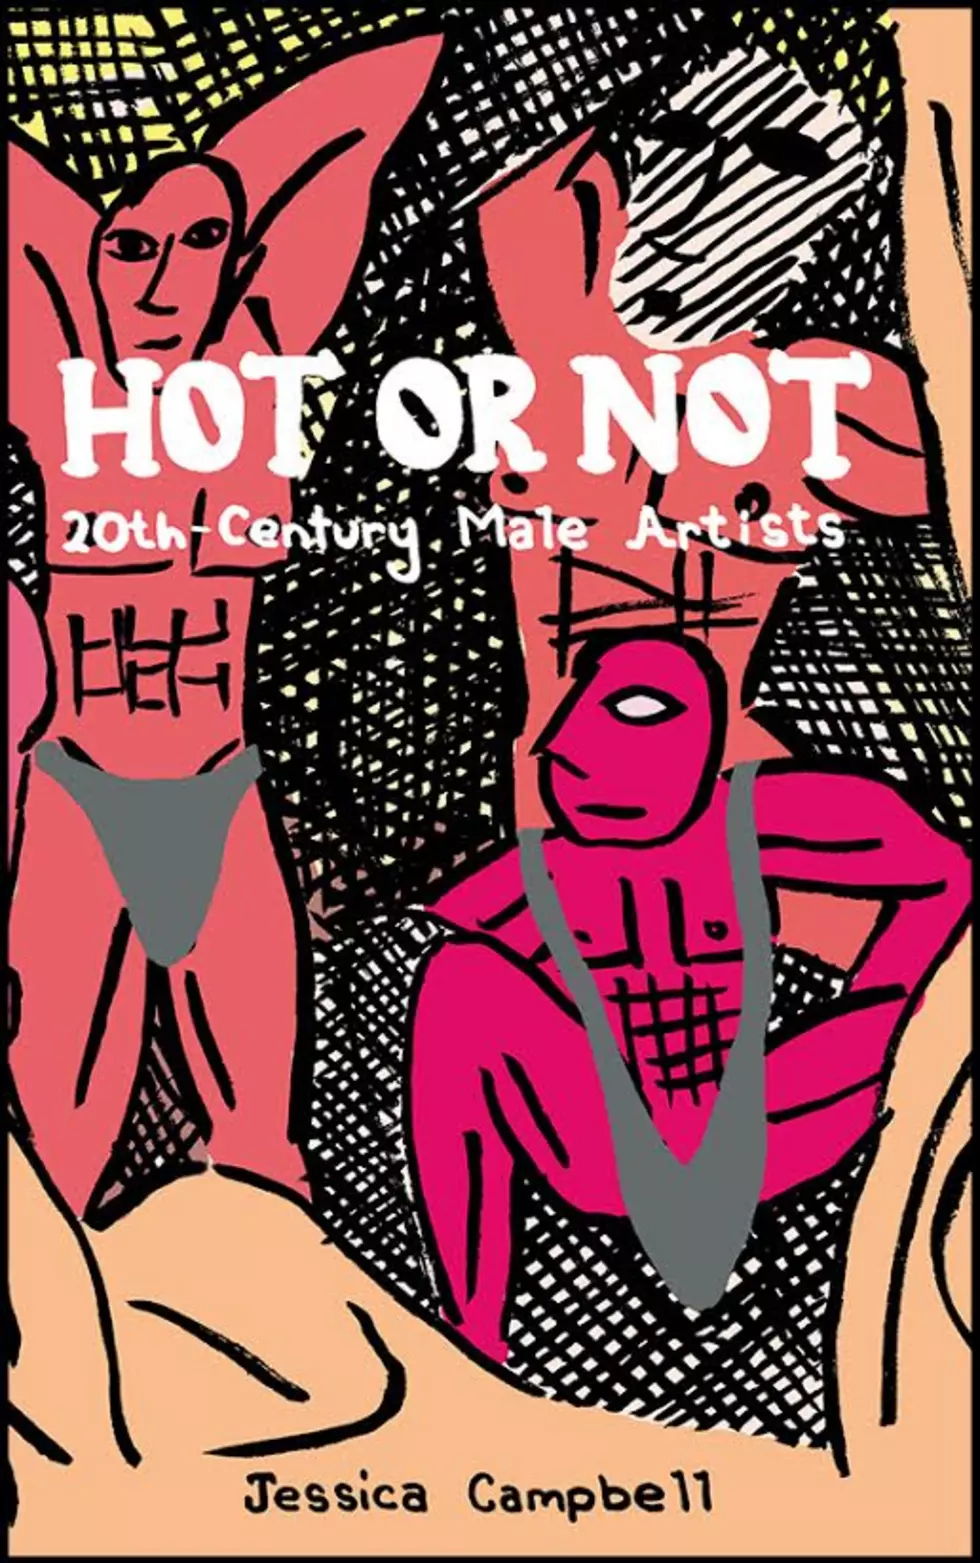 Jessica Campbell Casts A Female Gaze On The Art World In &#8216;Hot or Not?&#8217; [Love &#038; Sex Week]